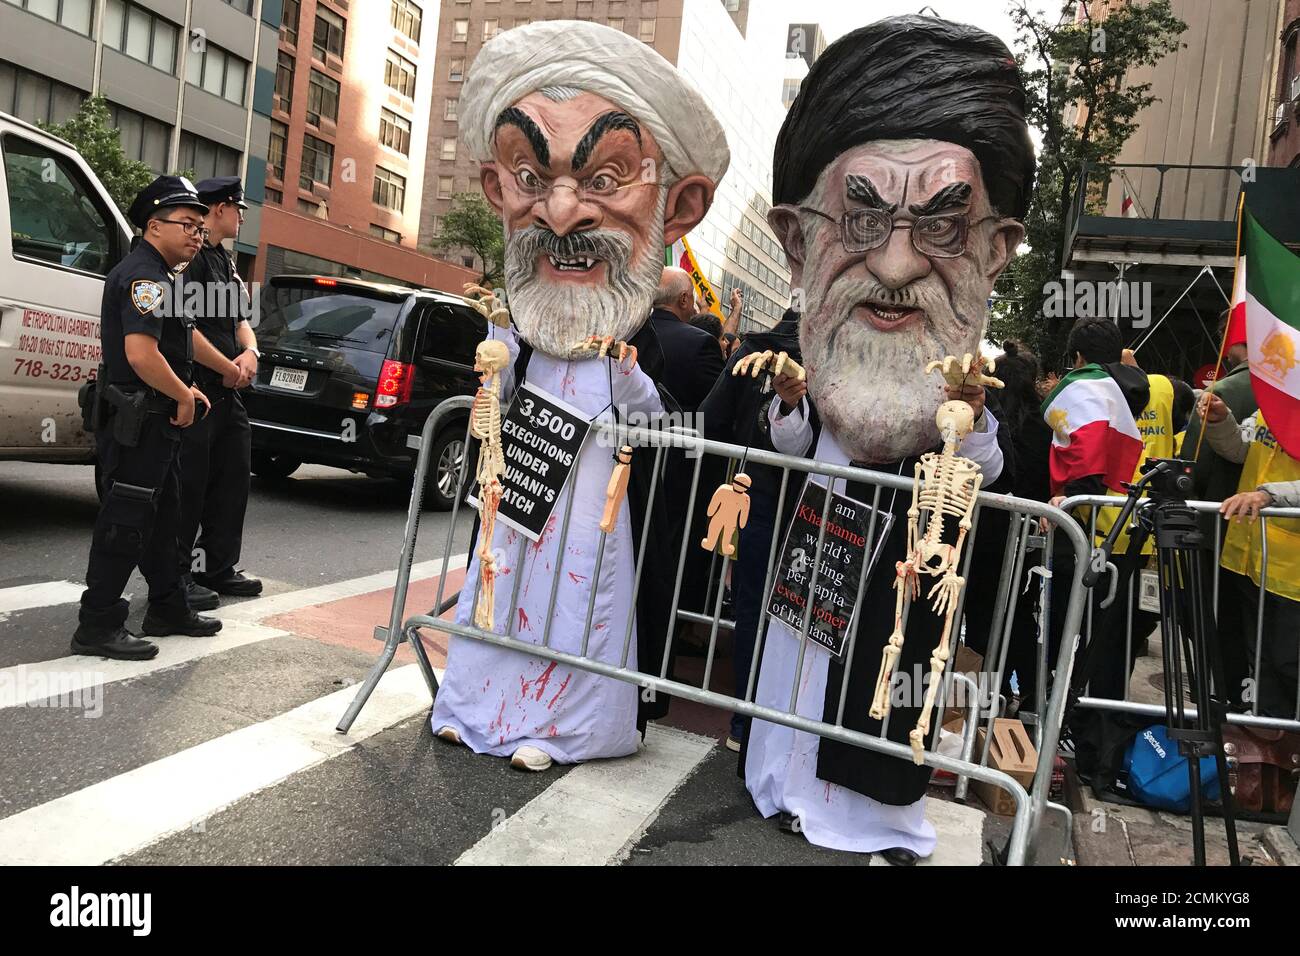 People dressed as Iran's Supreme Leader, Ayatollah Ali Khamenei and Iranian President Hassan Rouhani protest on the street against Iran in New York, New York, U.S., September 24, 2018. REUTERS/Carlo Allegri TPX